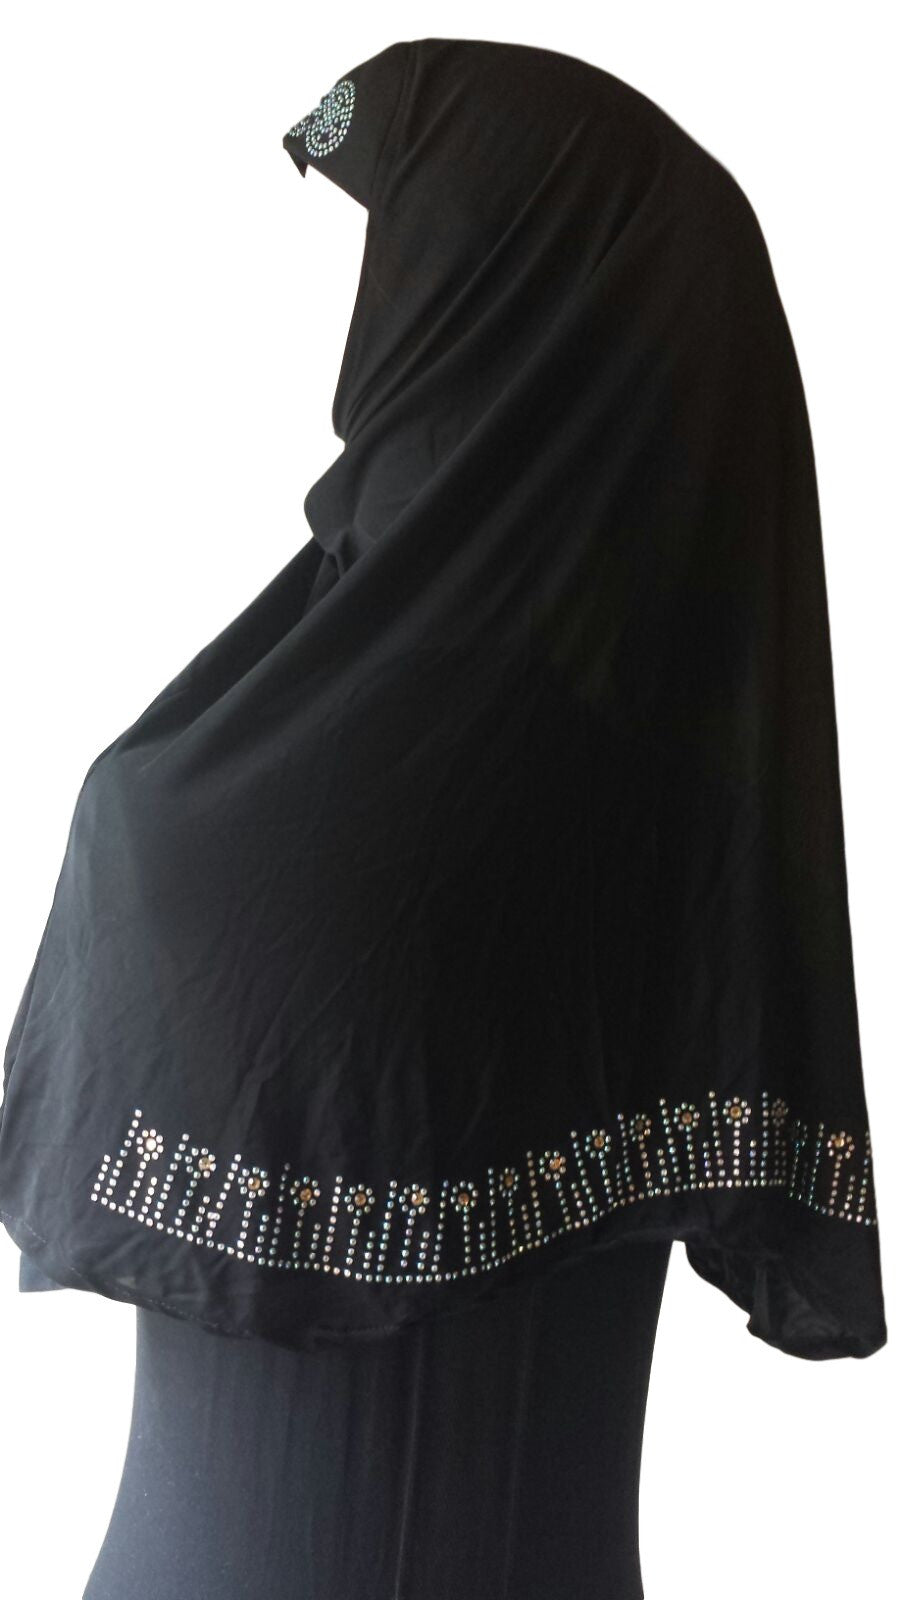 Black Lycra Hijab - 'Little Flowers' | Islamic Clothing and Books ...